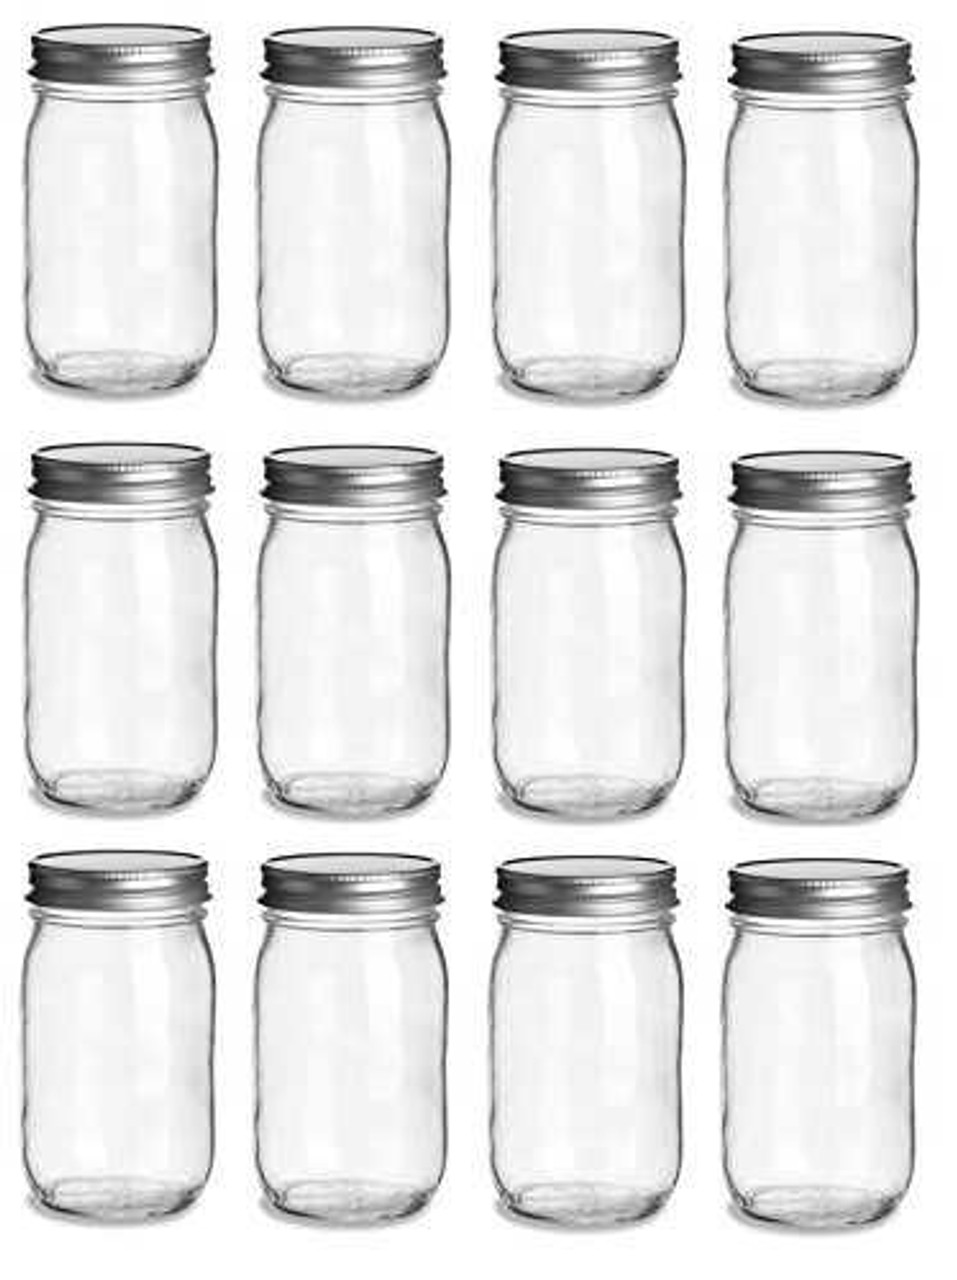 https://cdn11.bigcommerce.com/s-1ybtx/images/stencil/1280x1280/products/842/6040/16-oz-Mason-Glass-Jar-with-your-choice-of-lid-Pint-Made-In-USA_2604__31937.1674334356.jpg?c=2?imbypass=on